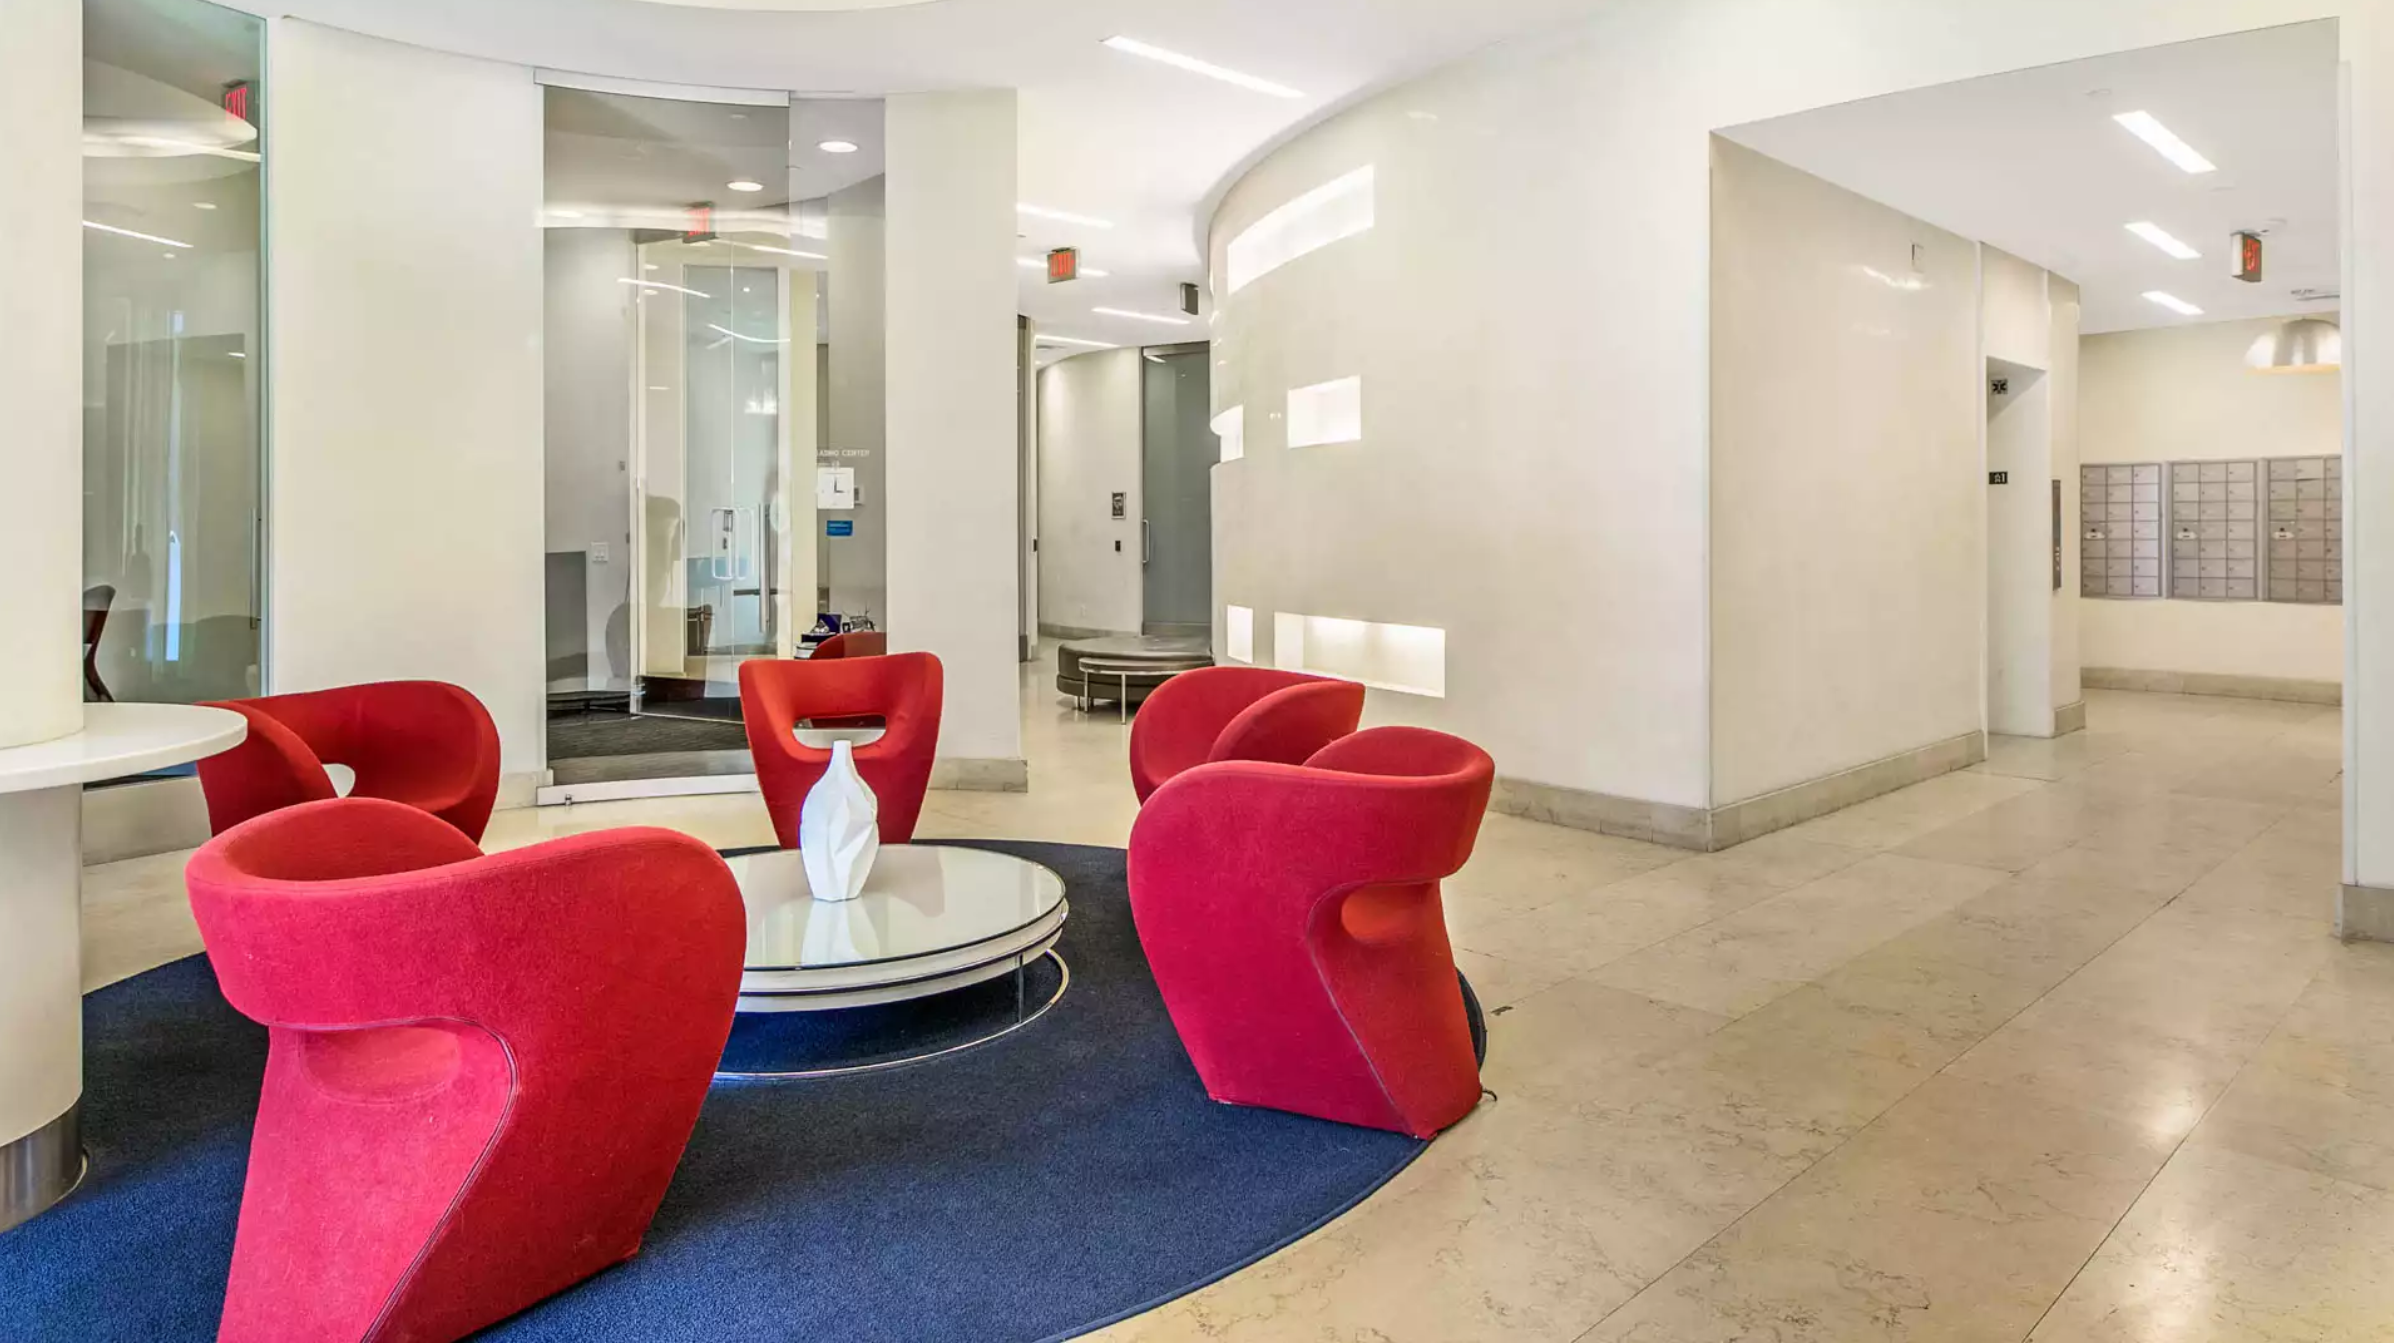 Inside view of a lobby area. There are modern sofa chairs that surround a small round table. To the right side there is an elevator entrance and a mailbox area. To the left is a curbed hallway and tall windows from another room. Soace is well litted all a